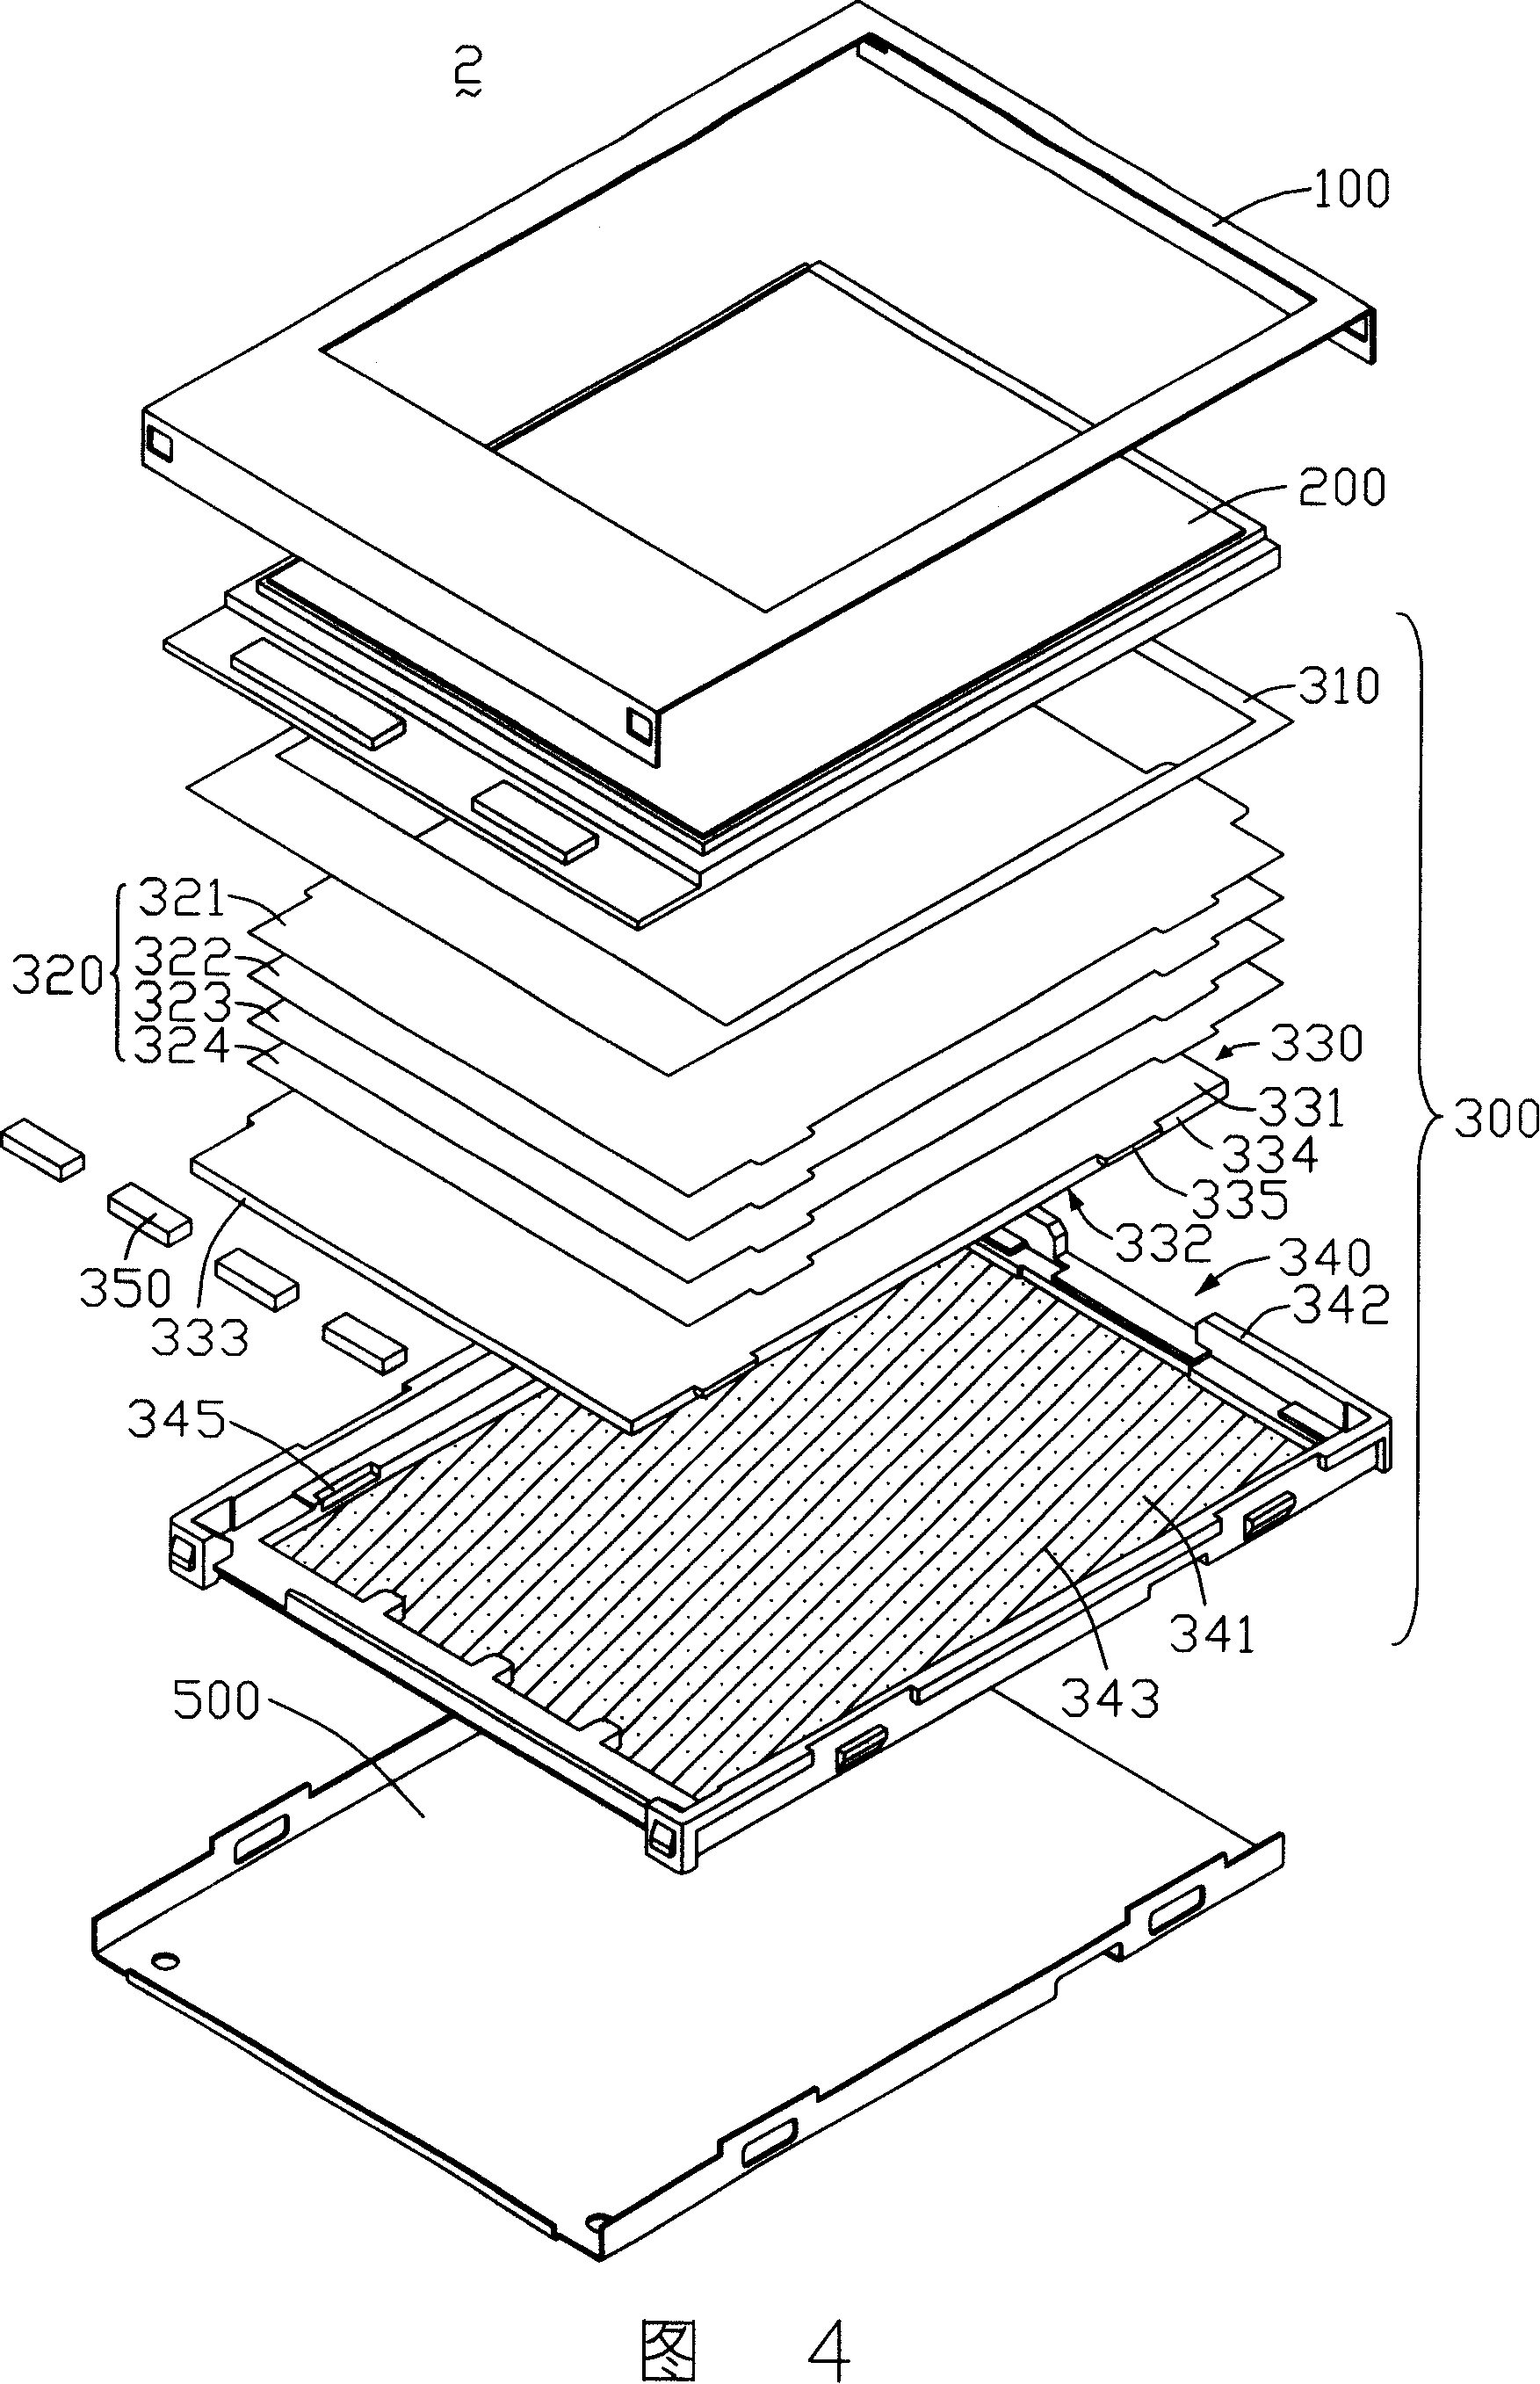 Backlight module group and liquid crystal display device